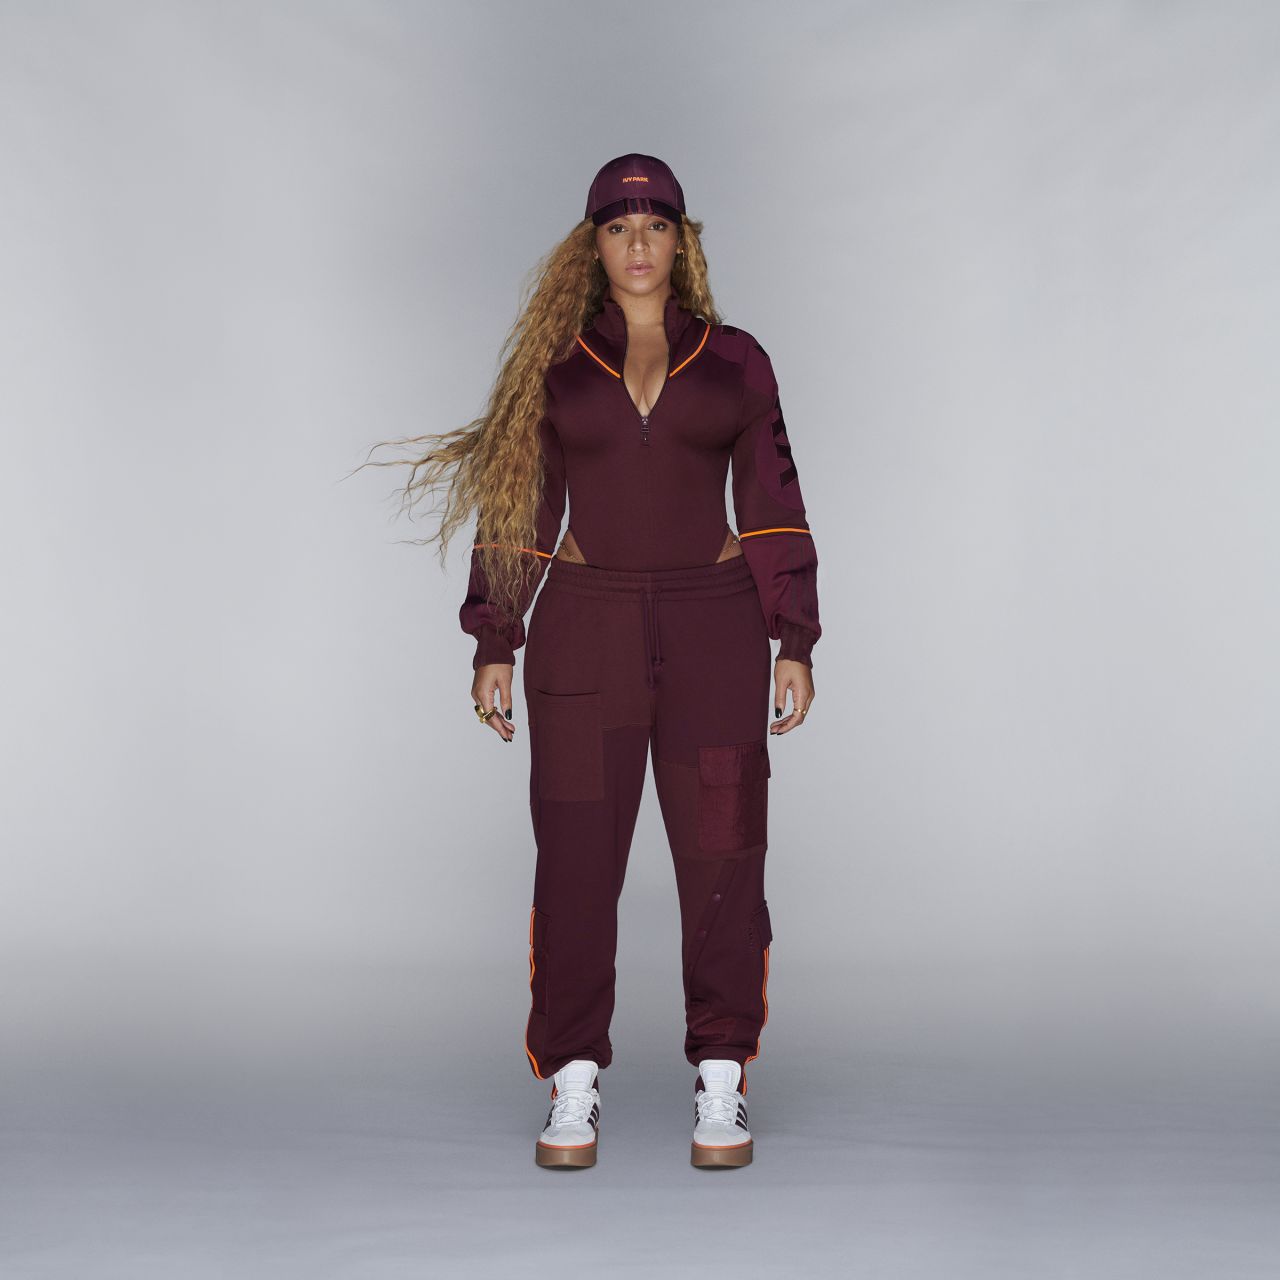 Beyonce Knowles - Adidas x IVY PARK, January 20201280 x 1280